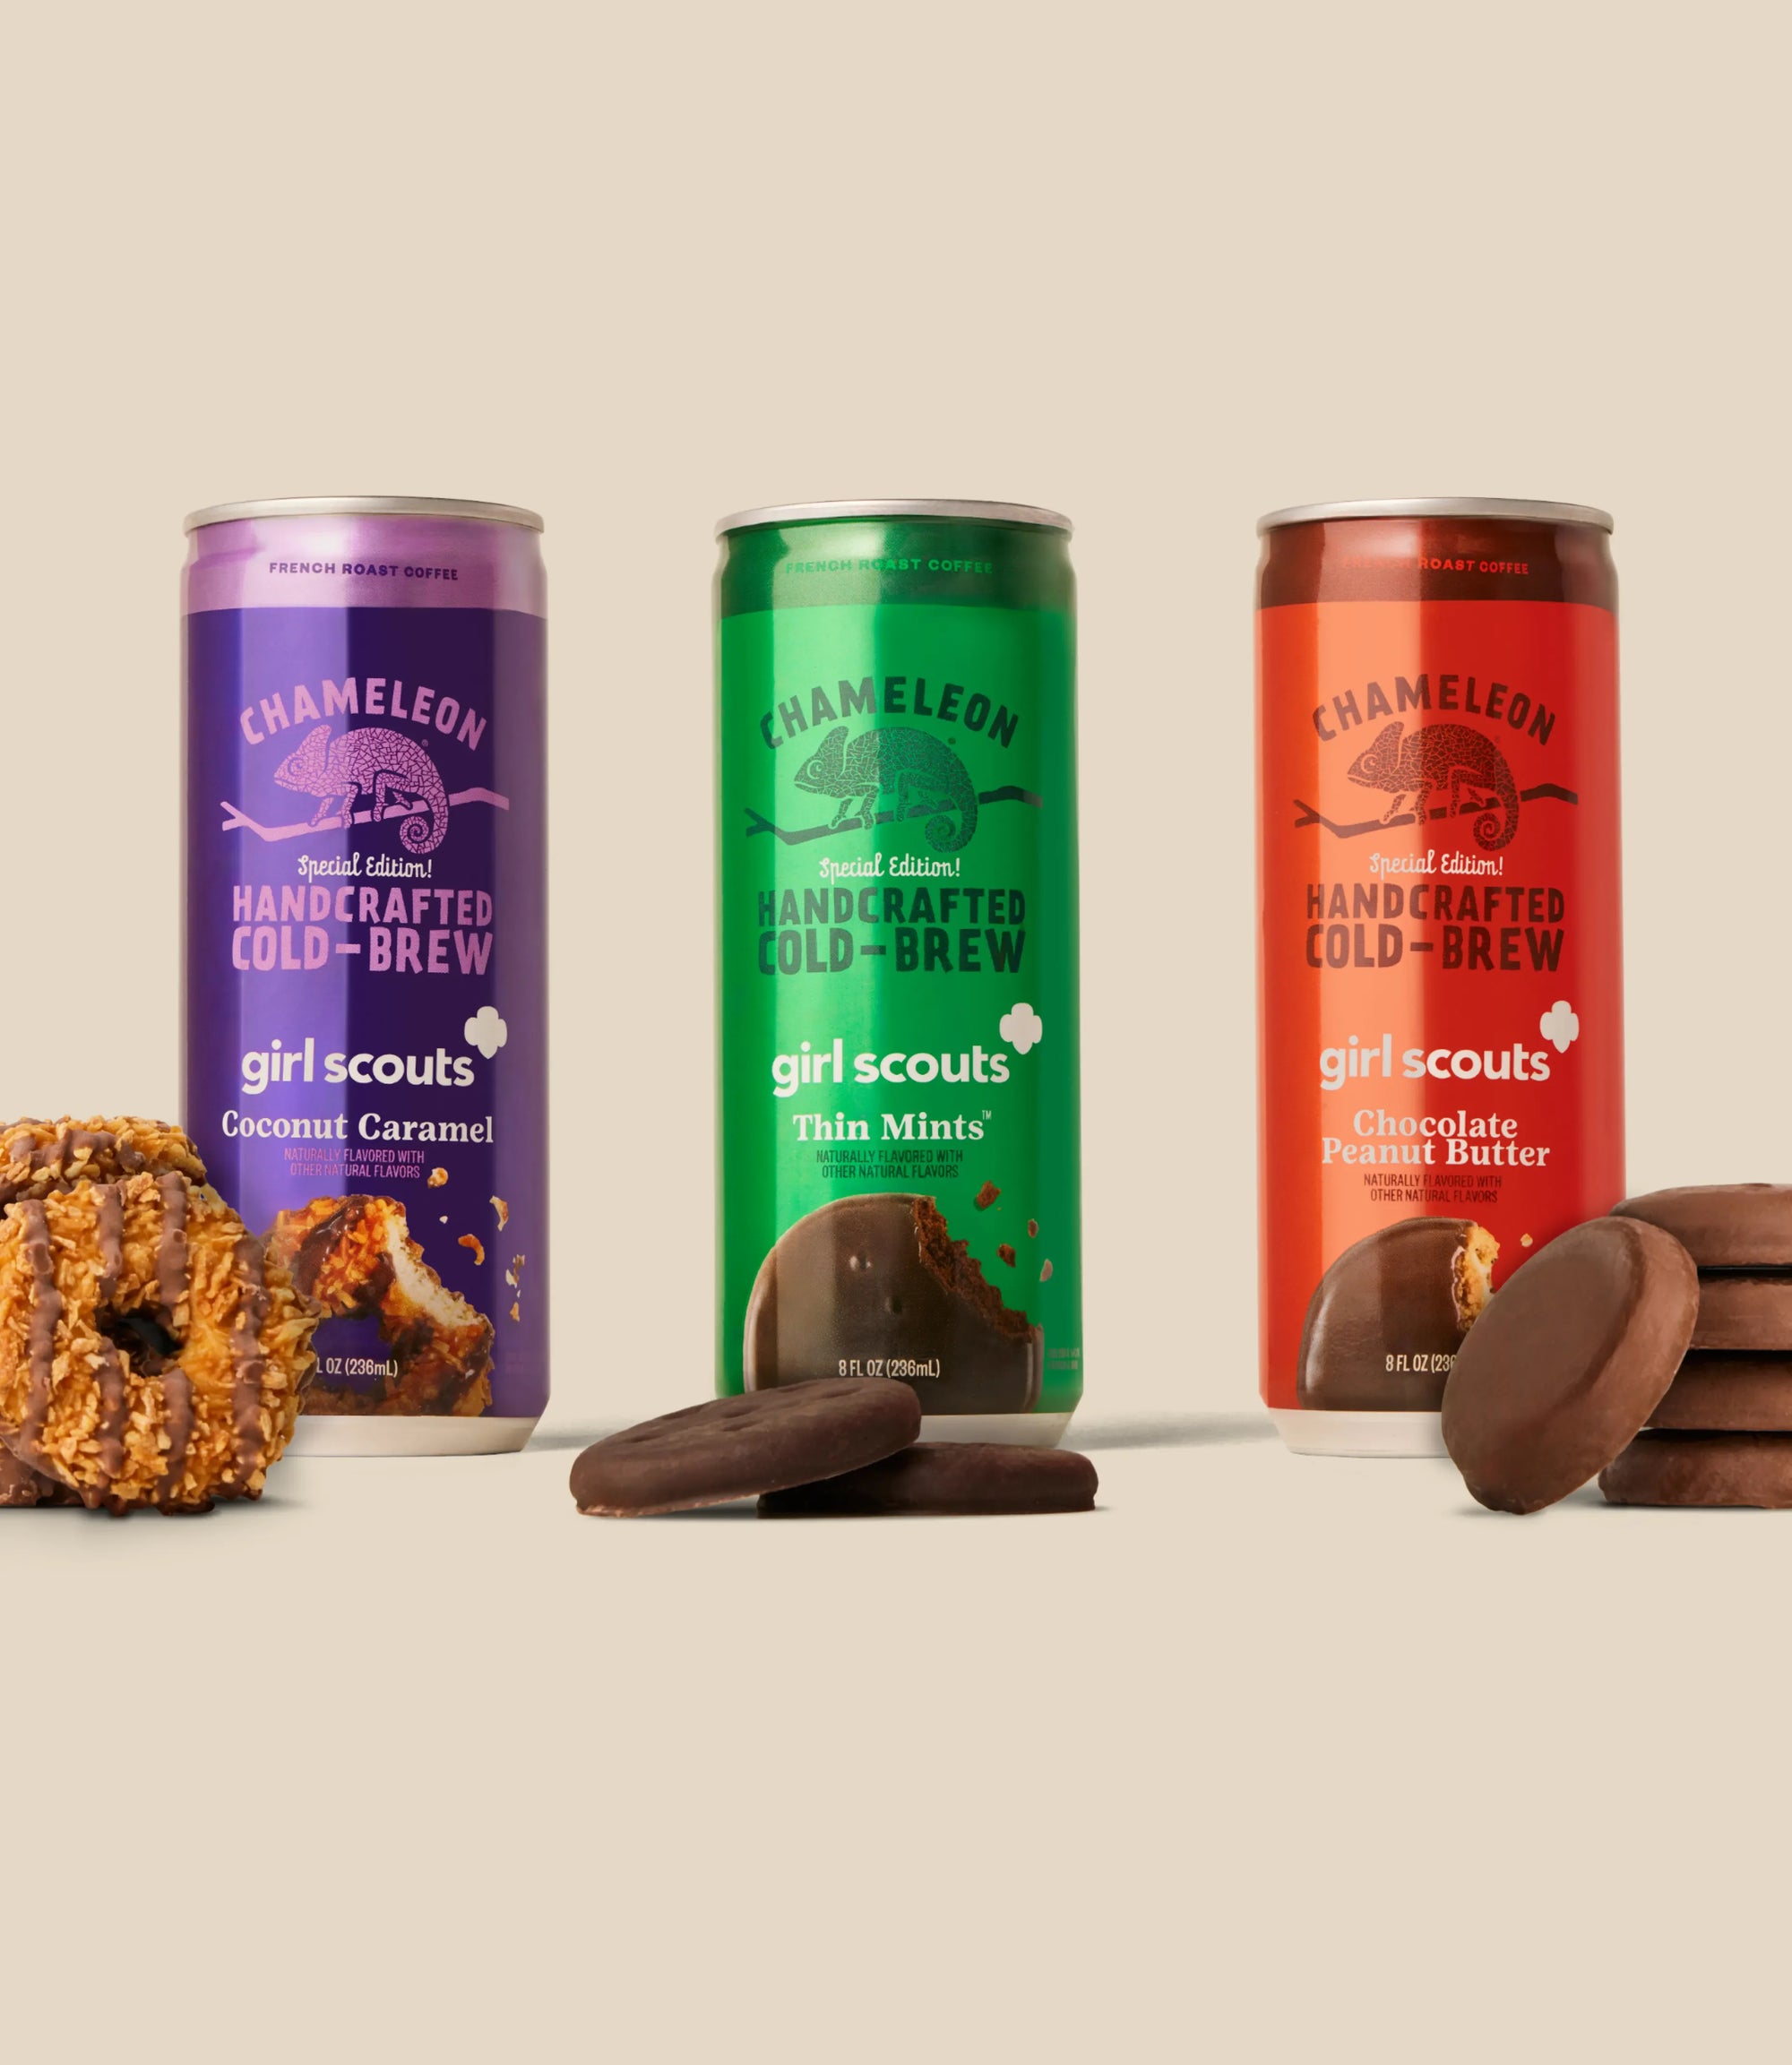 8oz GIRL SCOUT COLD-BREW LATTE VARIETY PACK